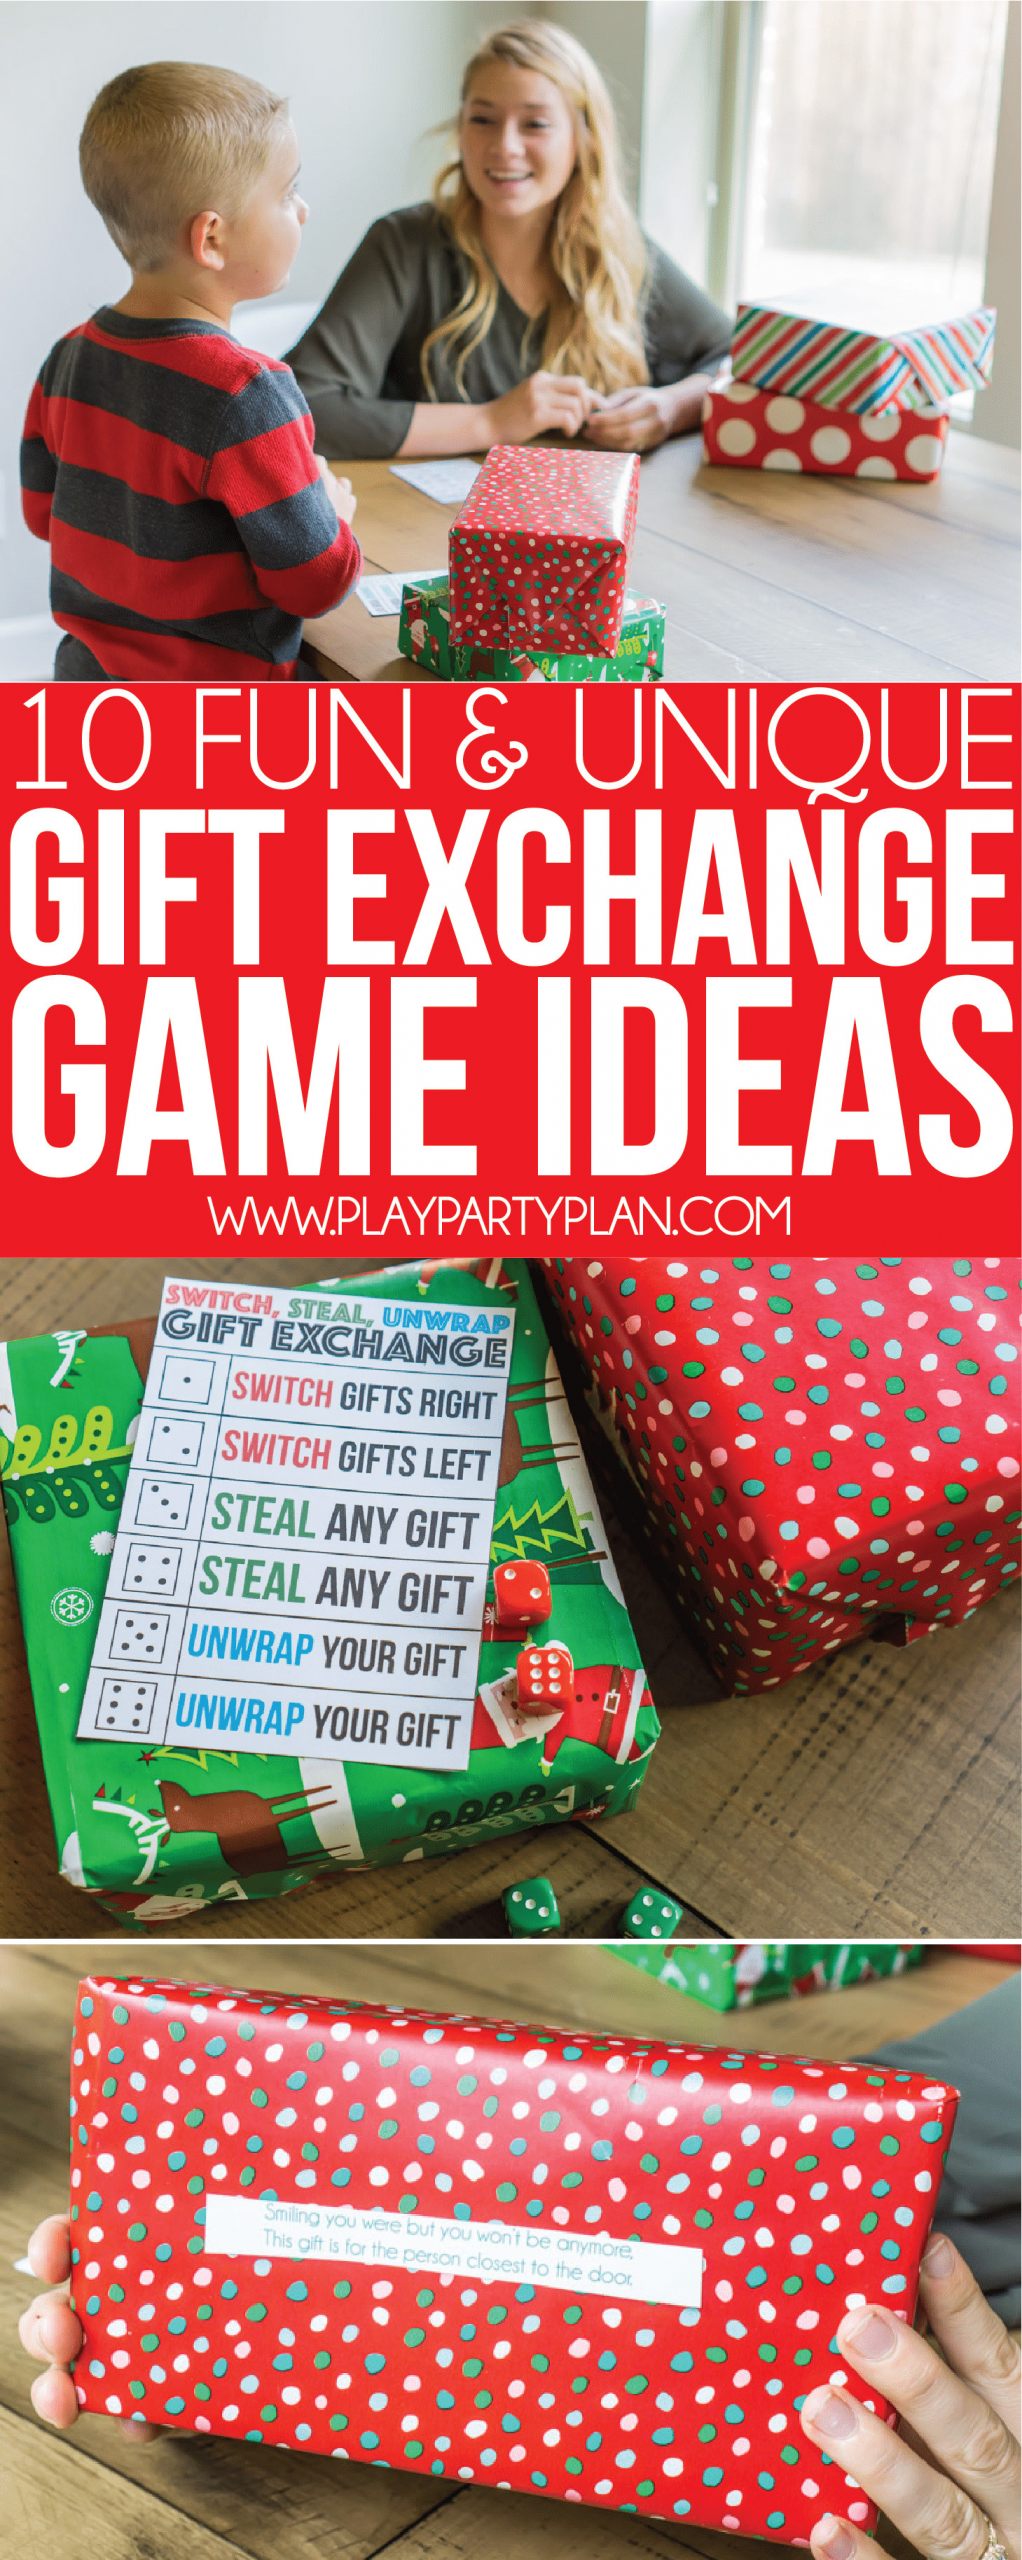 Christmas Gift Exchange Ideas For Kids
 12 Best Christmas Gift Exchange Games Play Party Plan